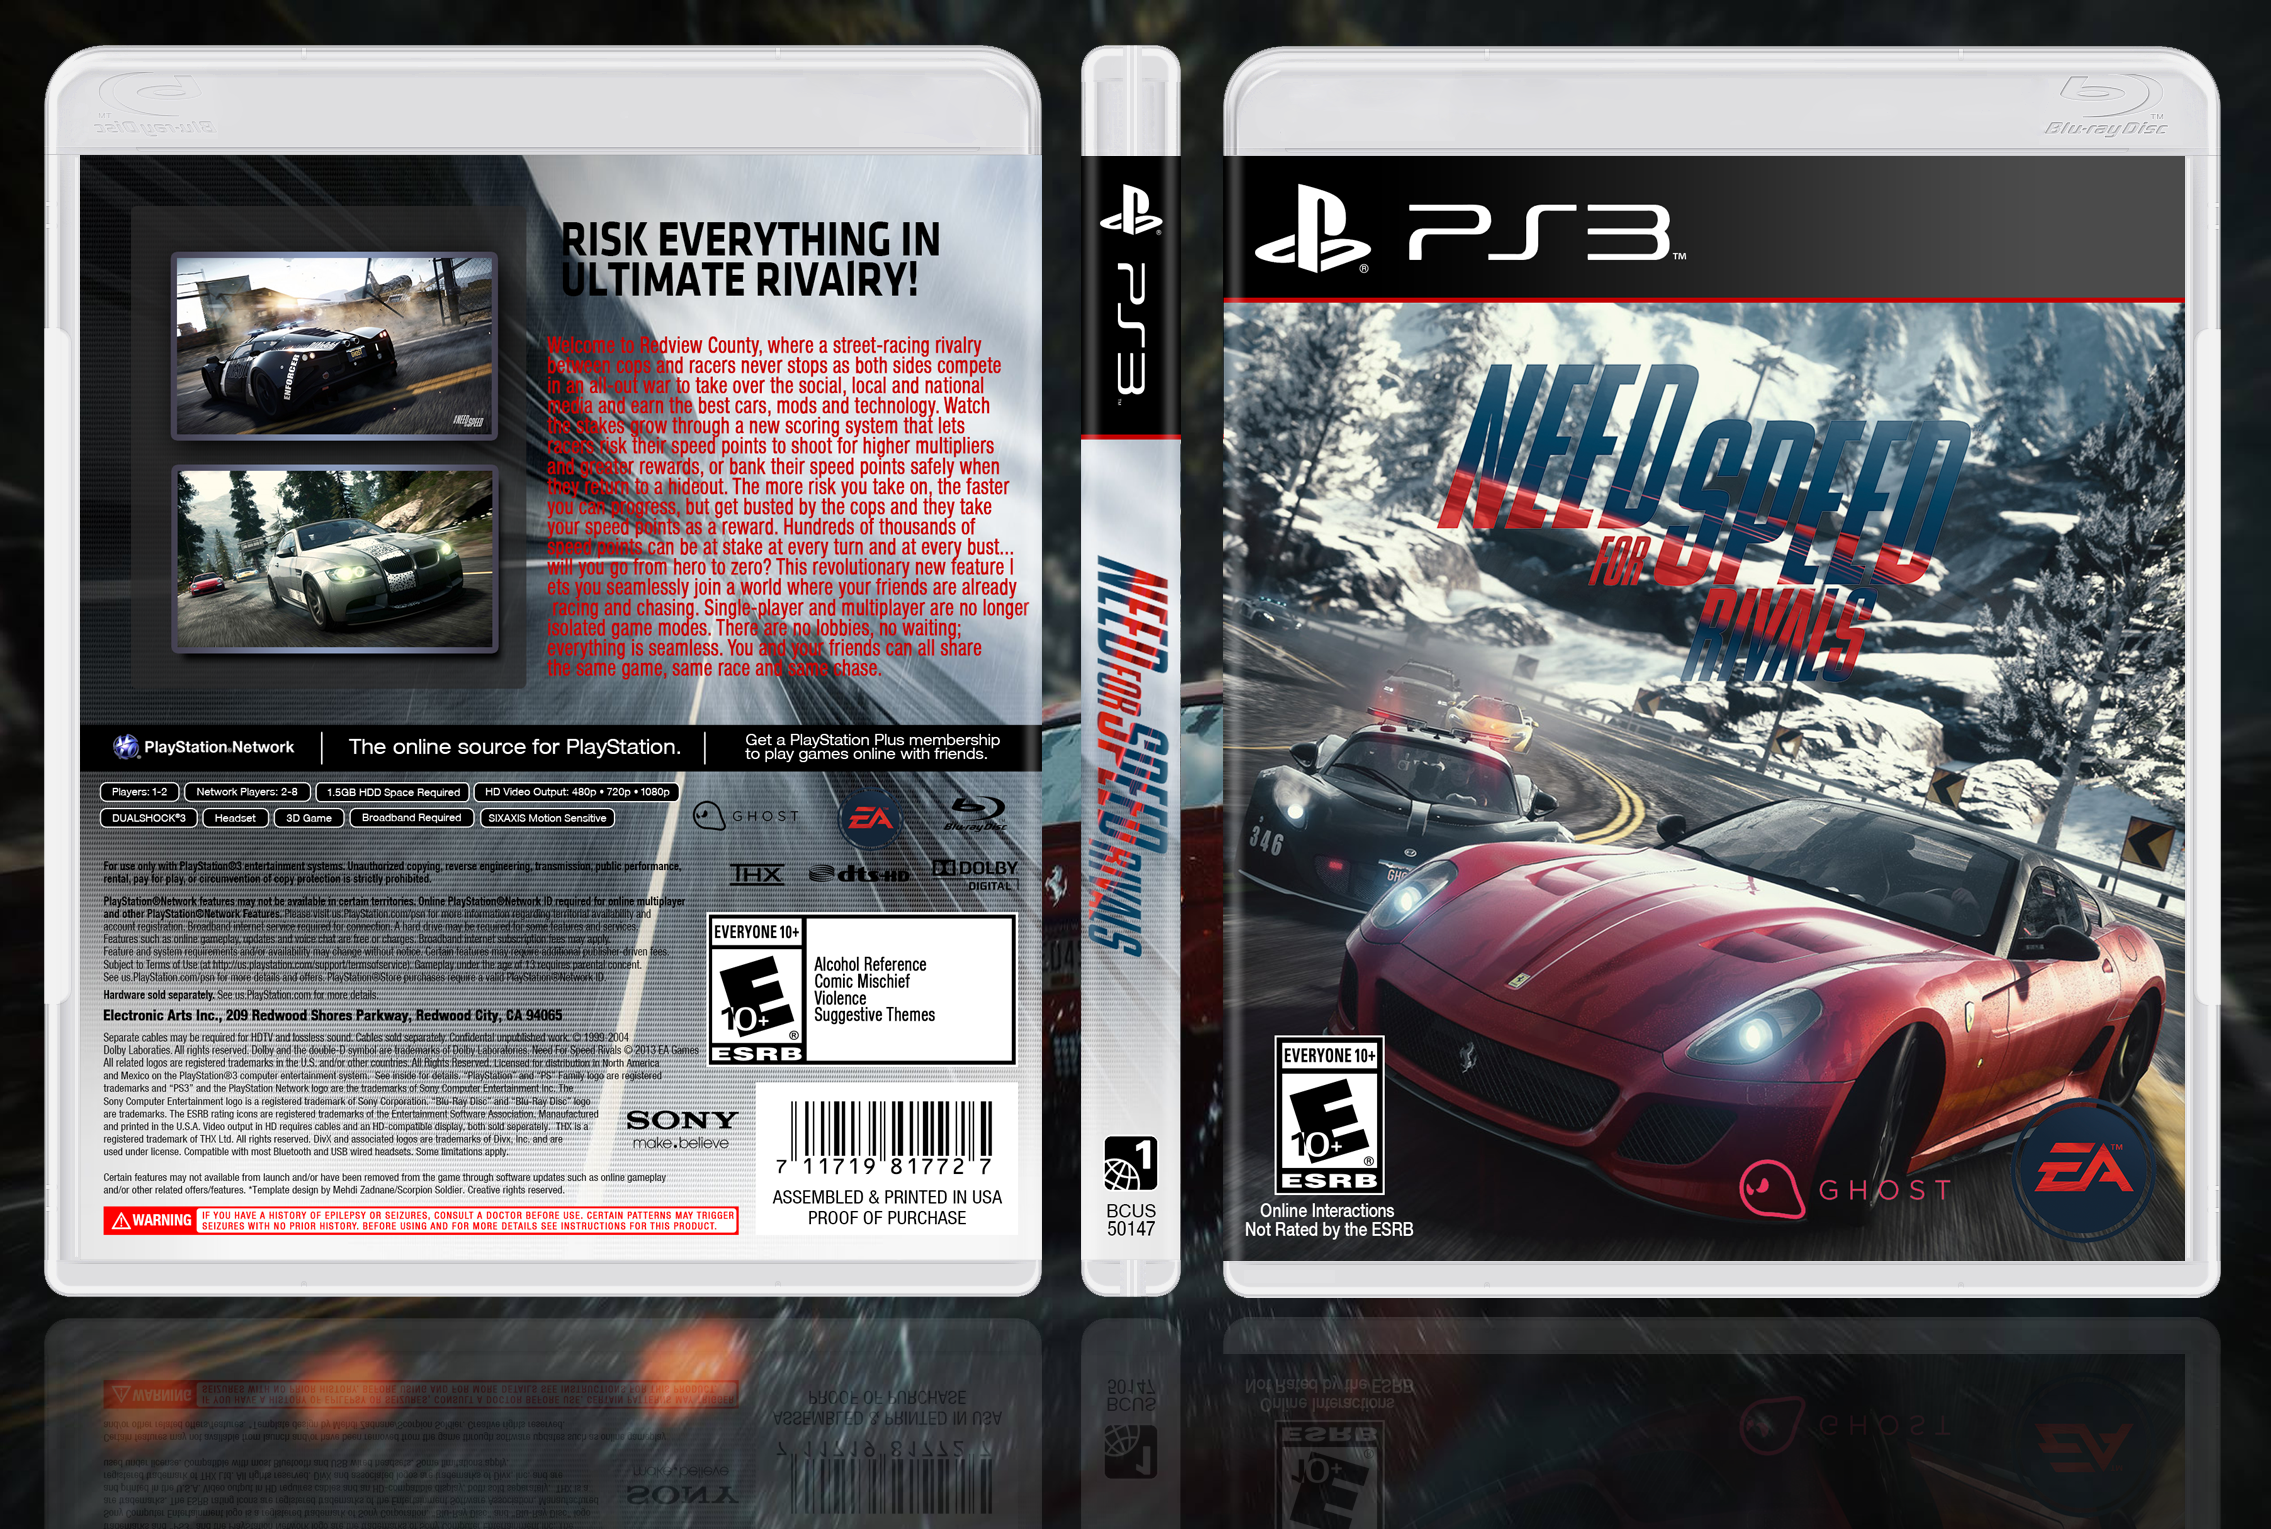 Форум ps3 игр. Ps3 диск need for Speed. Ps3 диск need for Speed collection. Need for Speed на ПС 3. Need for Speed Rivals PLAYSTATION 3.